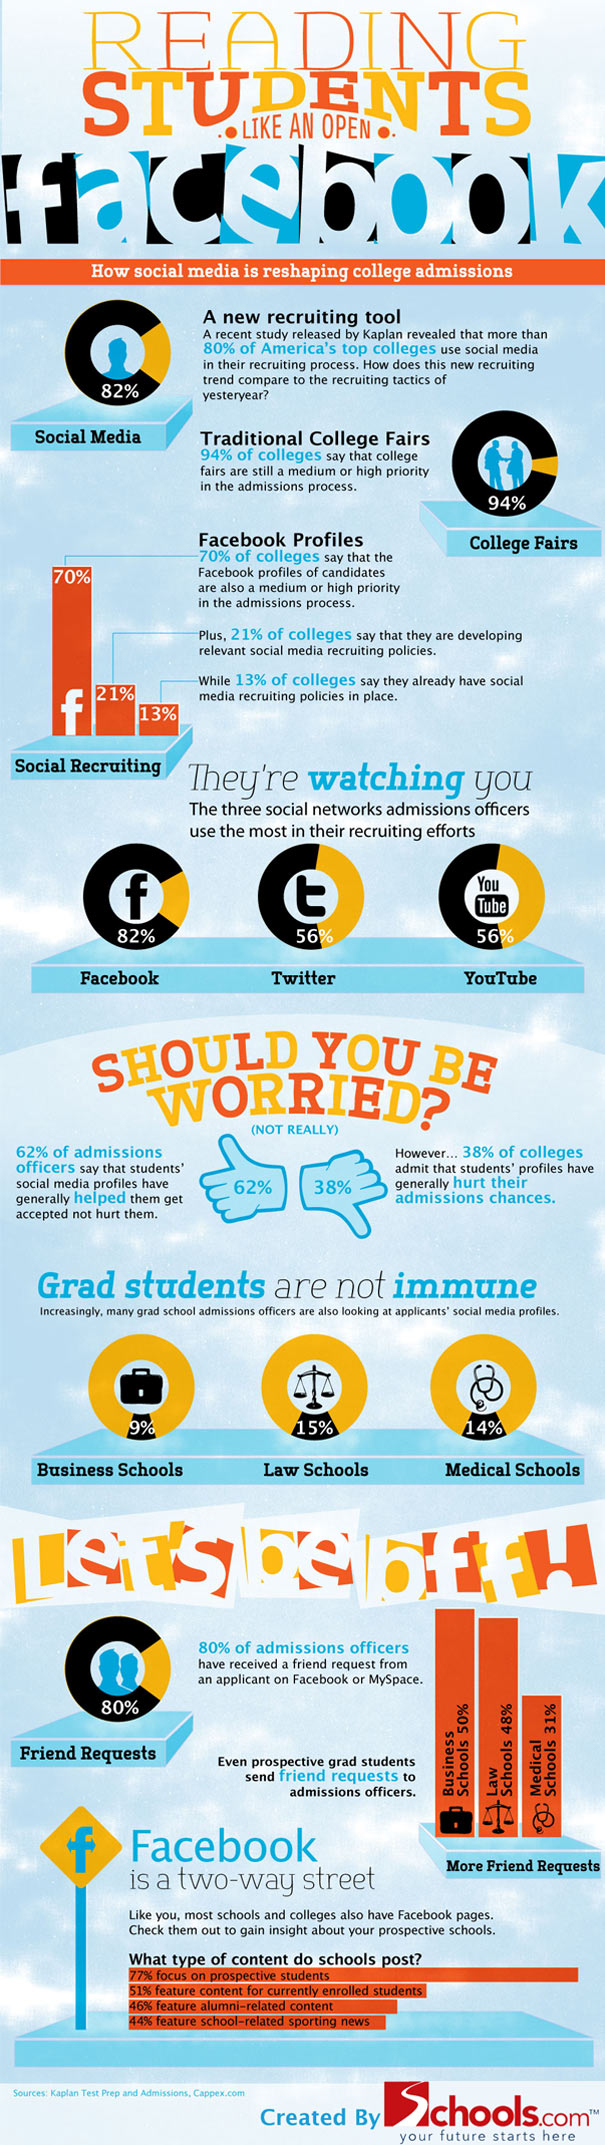 social media usage amongst university students - how to plan your content and communications to attract them